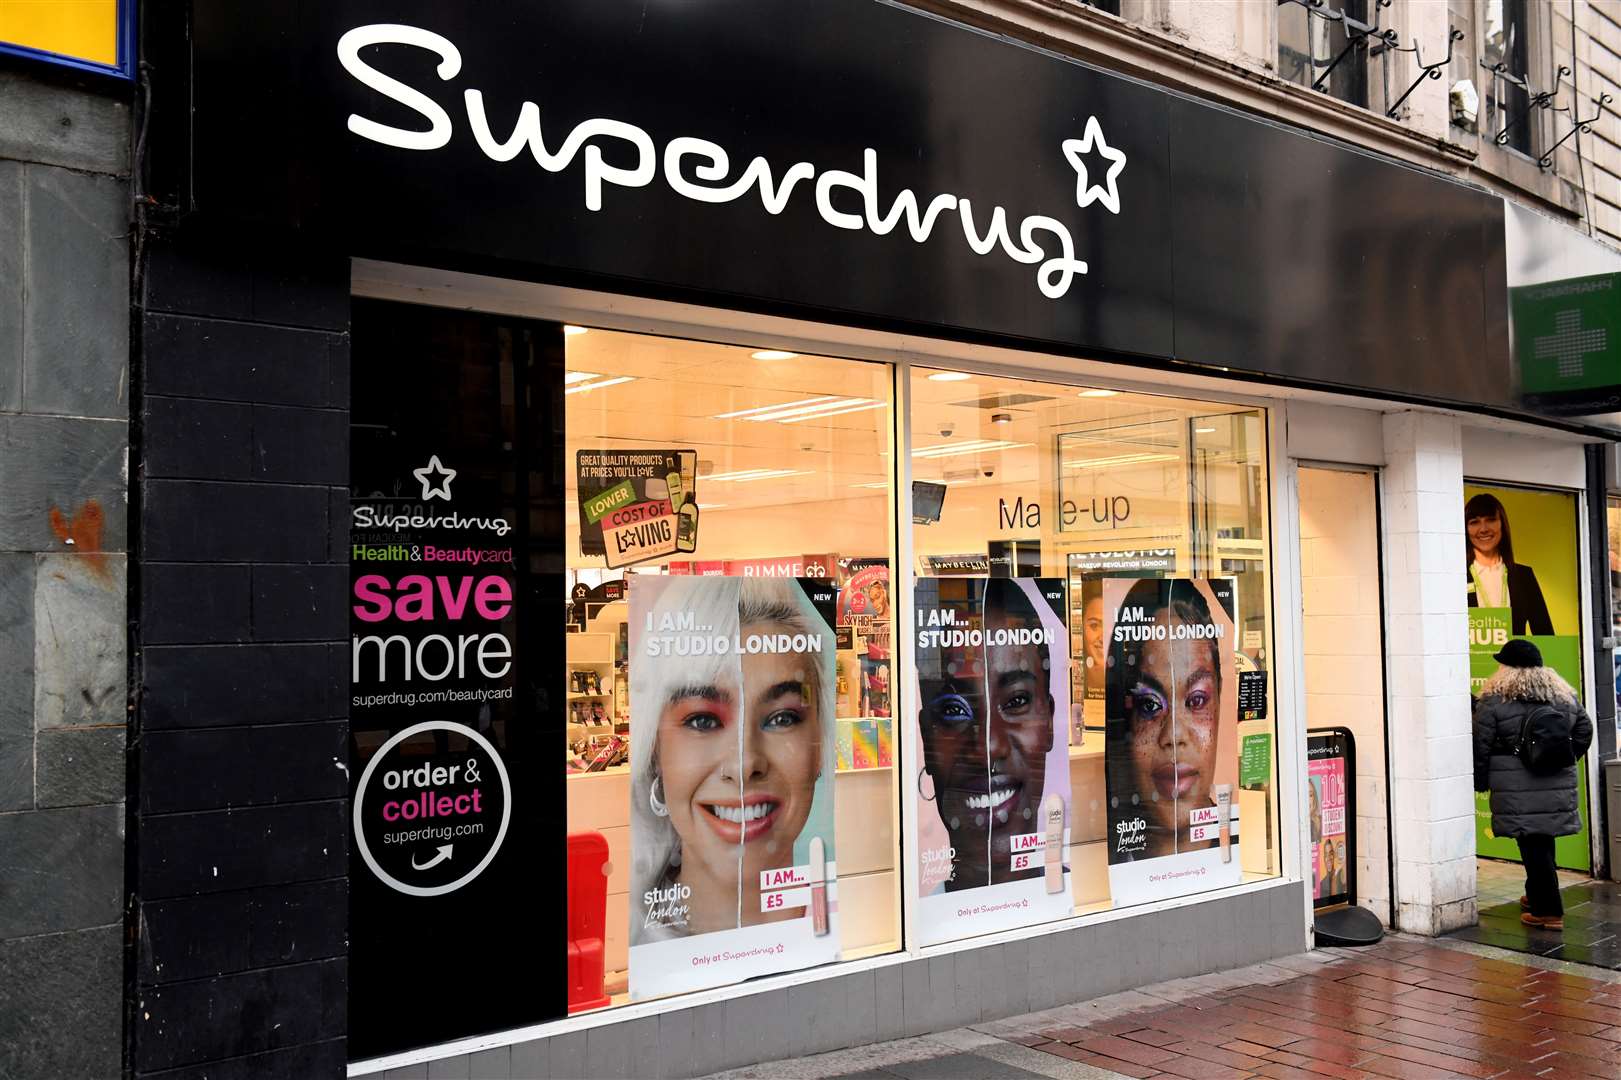 The offence took place at Superdrug.